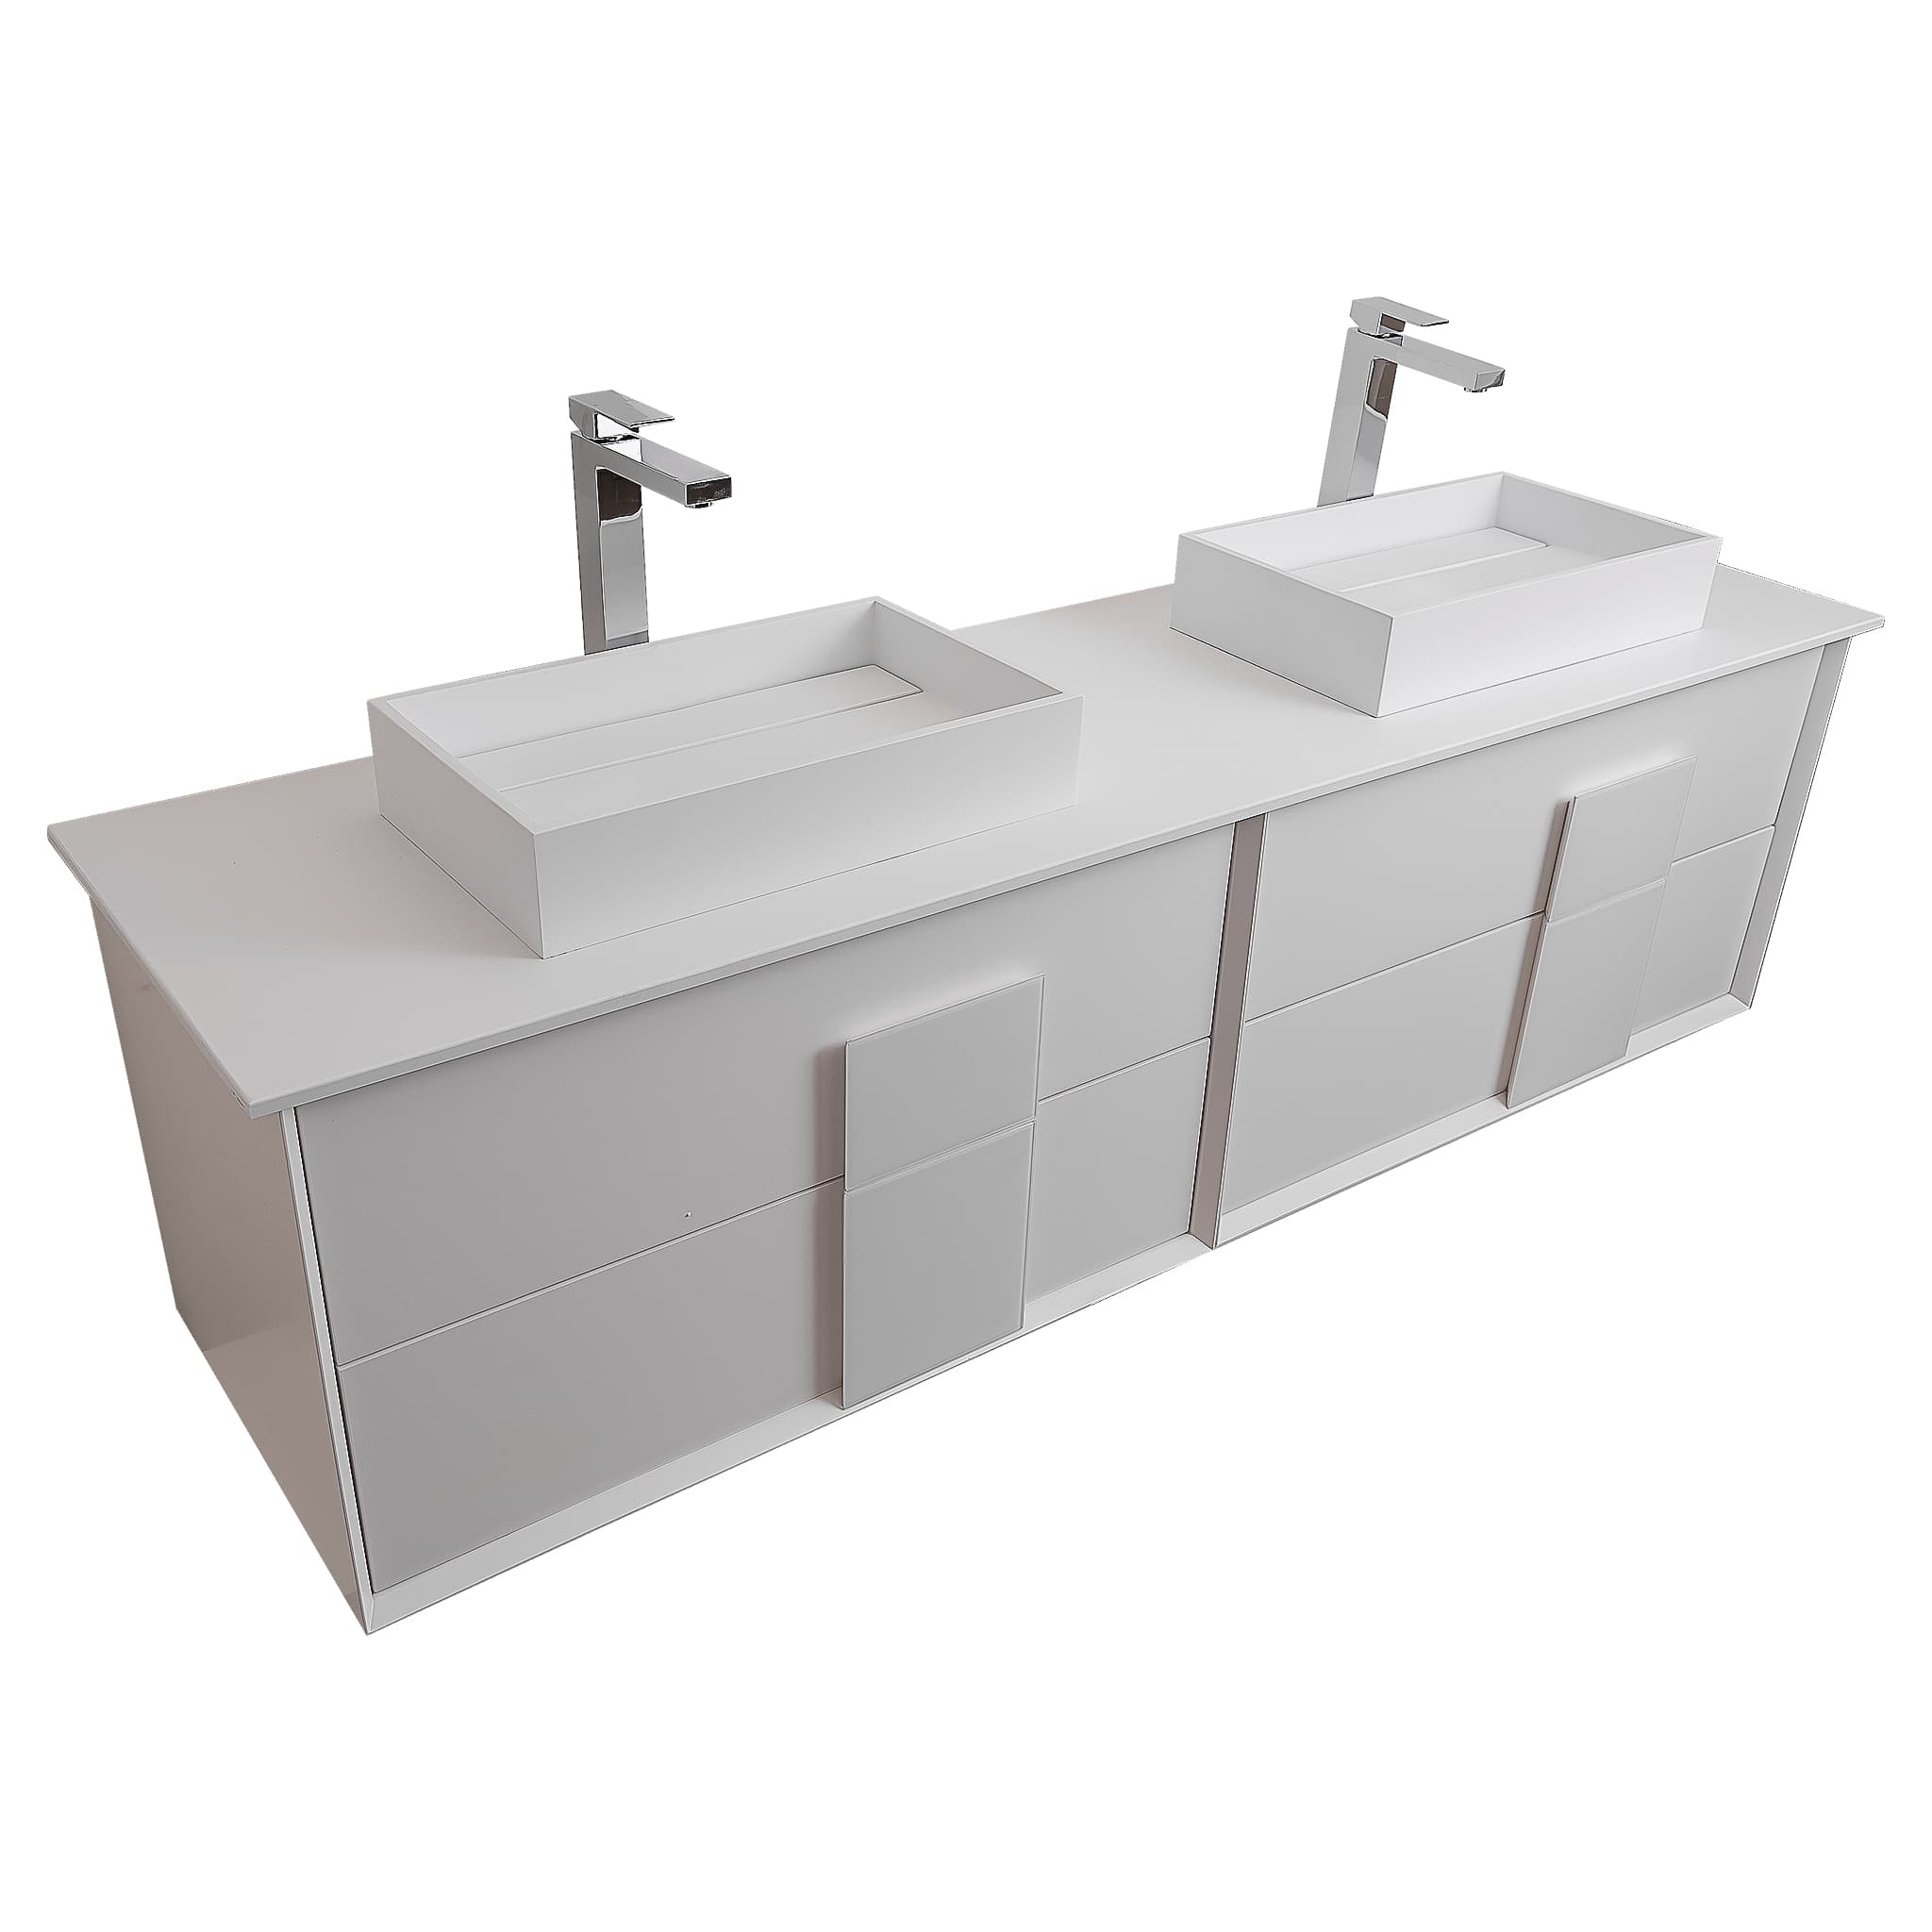 Piazza 63 Matte White With White Handle Cabinet, Solid Surface Flat White Counter and Two Infinity Square Solid Surface White Basin 1329, Wall Mounted Modern Vanity Set